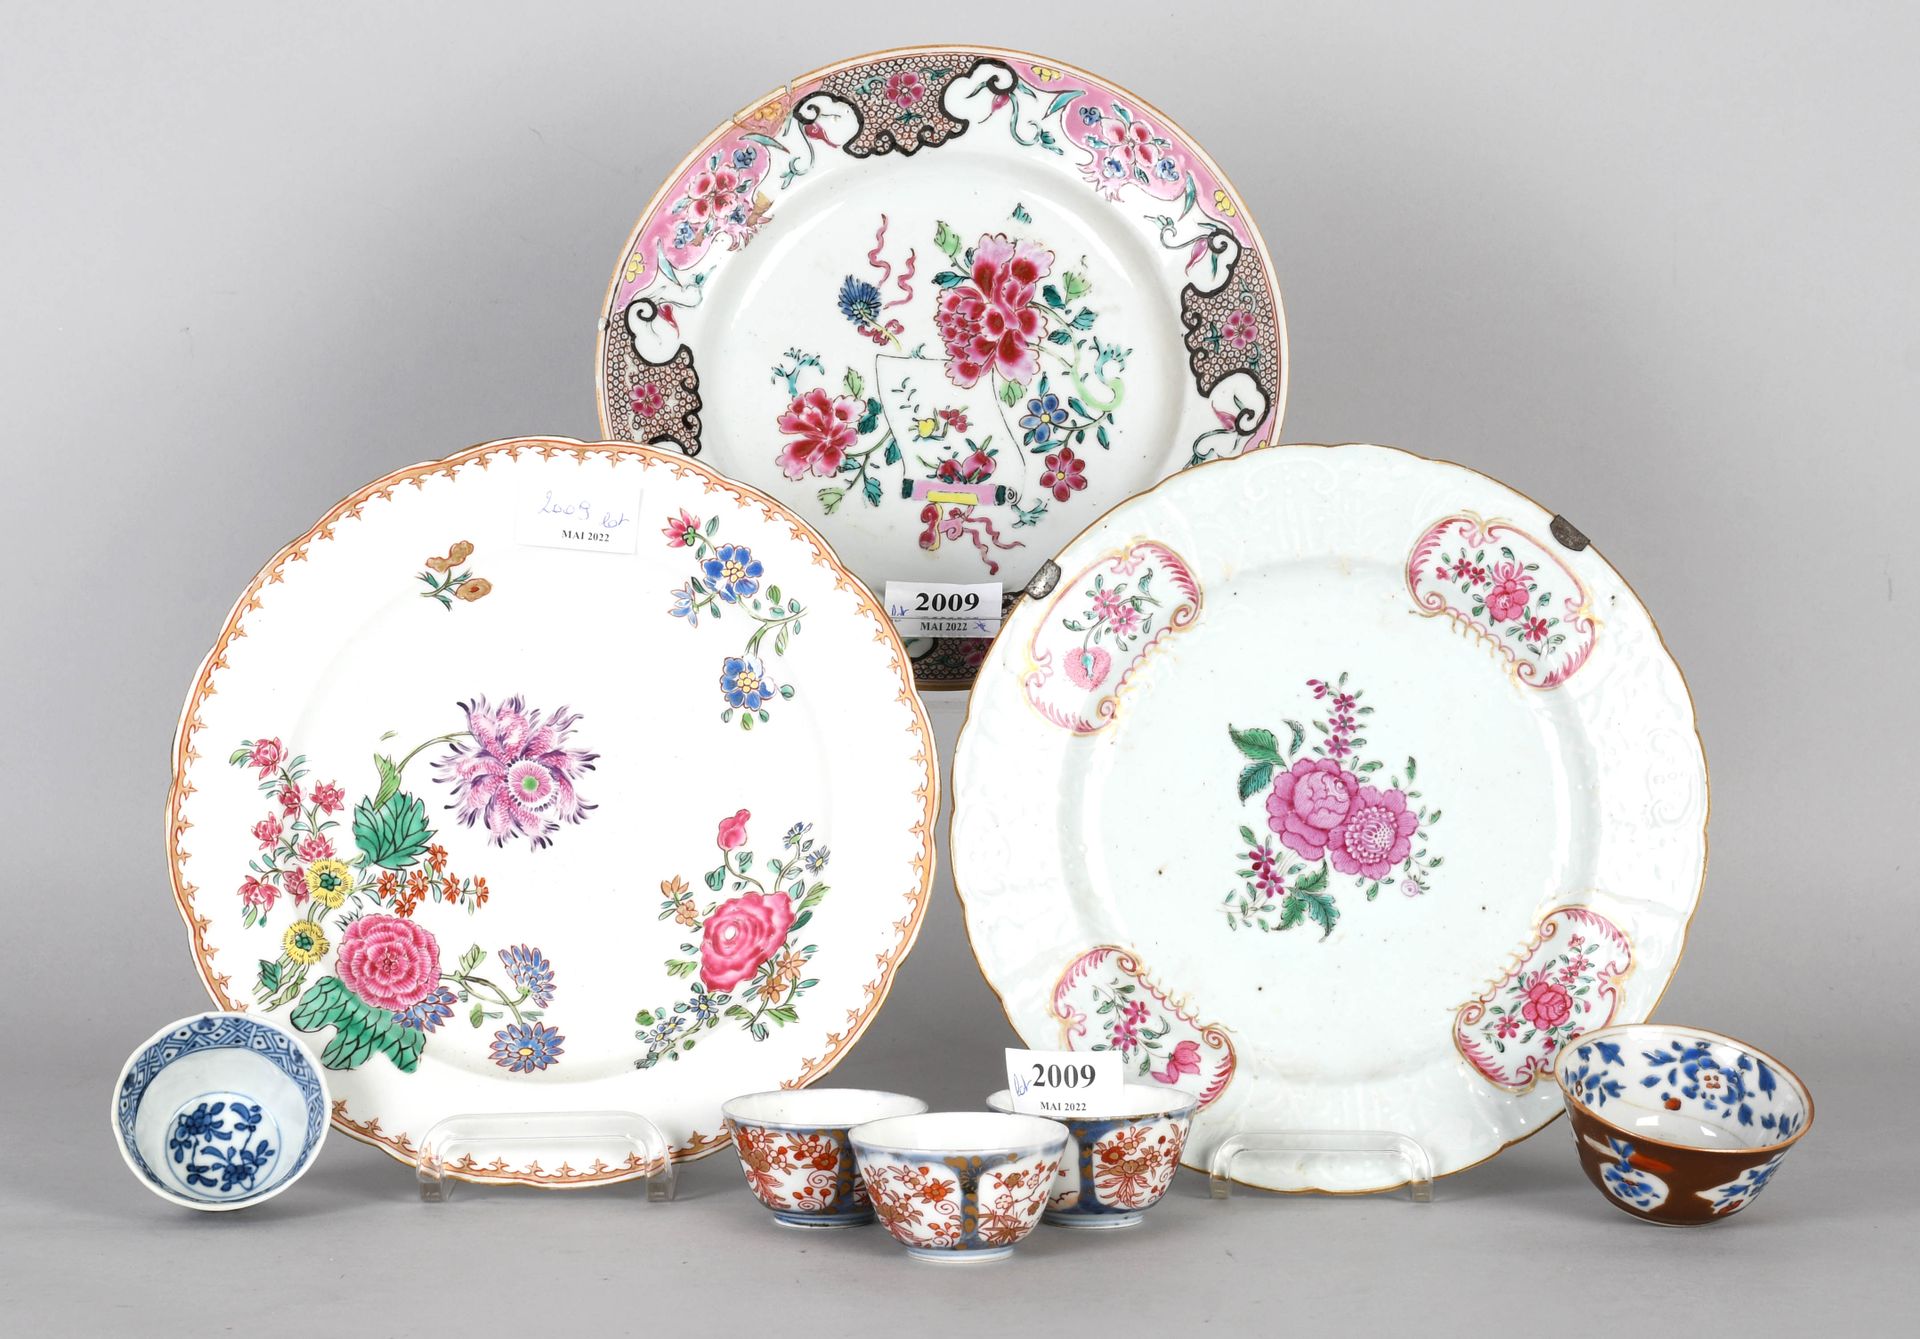 Null Set of three polychrome plates from China, and, Imari and China pouches